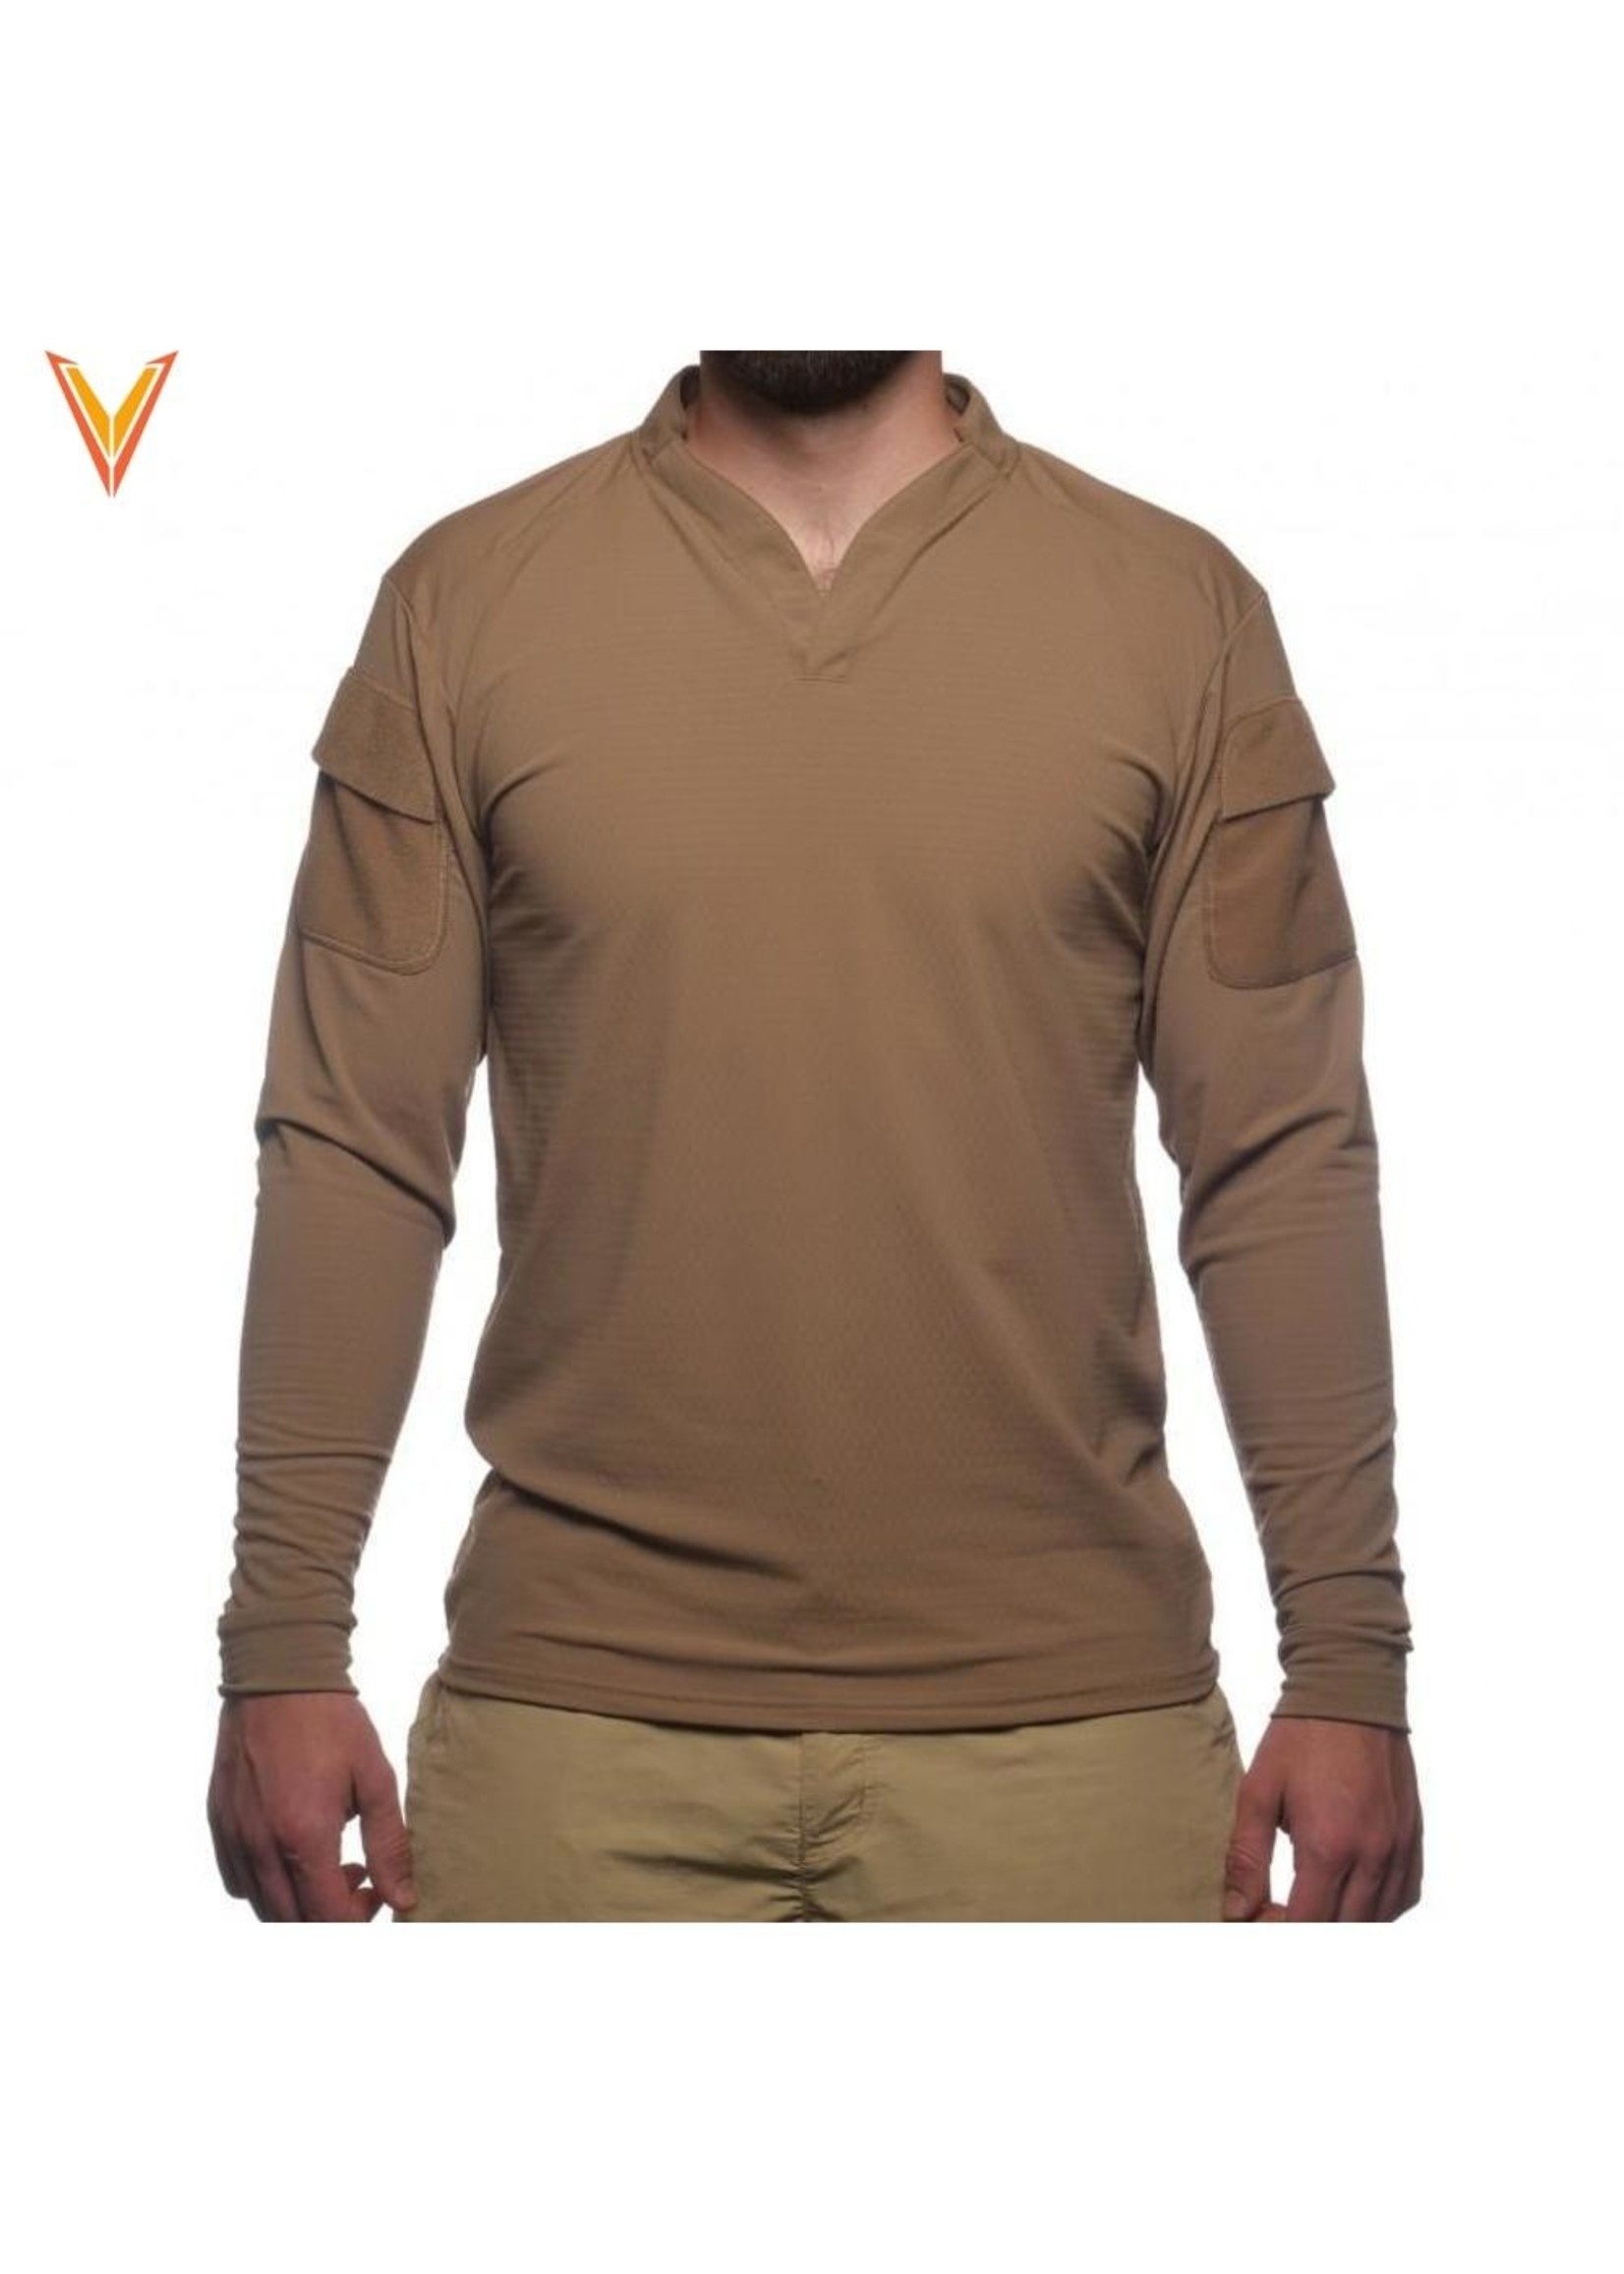 VELOCITY SYSTEMS BOSS RUGBY LONG SLEEVE SHIRT